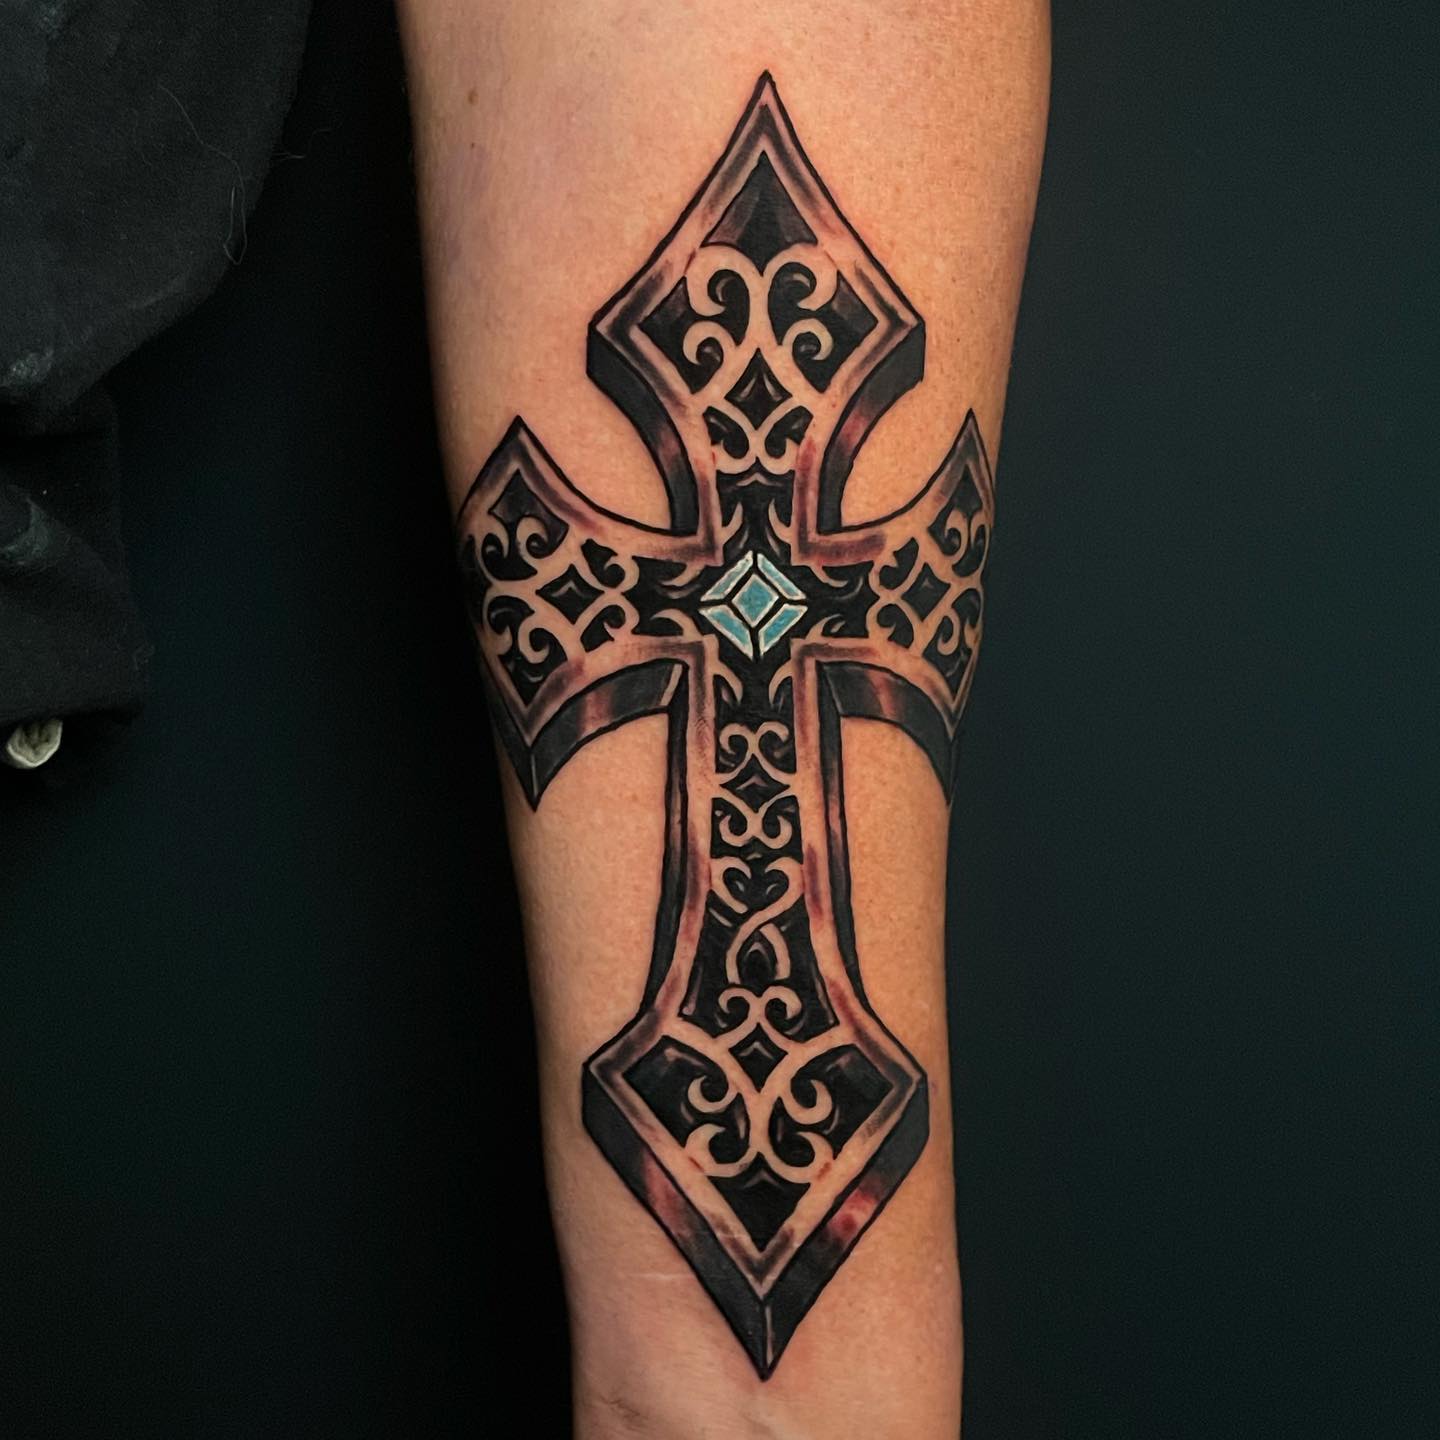 Wanna get a big cross tattoo on your arm? The cross above is full of nice motifs inside. Plus, it has a 3D effect. This effect makes it look like it has a depth. The blue sign in the middle of the cross offers an extraordinary look. You need to give it a shot. 